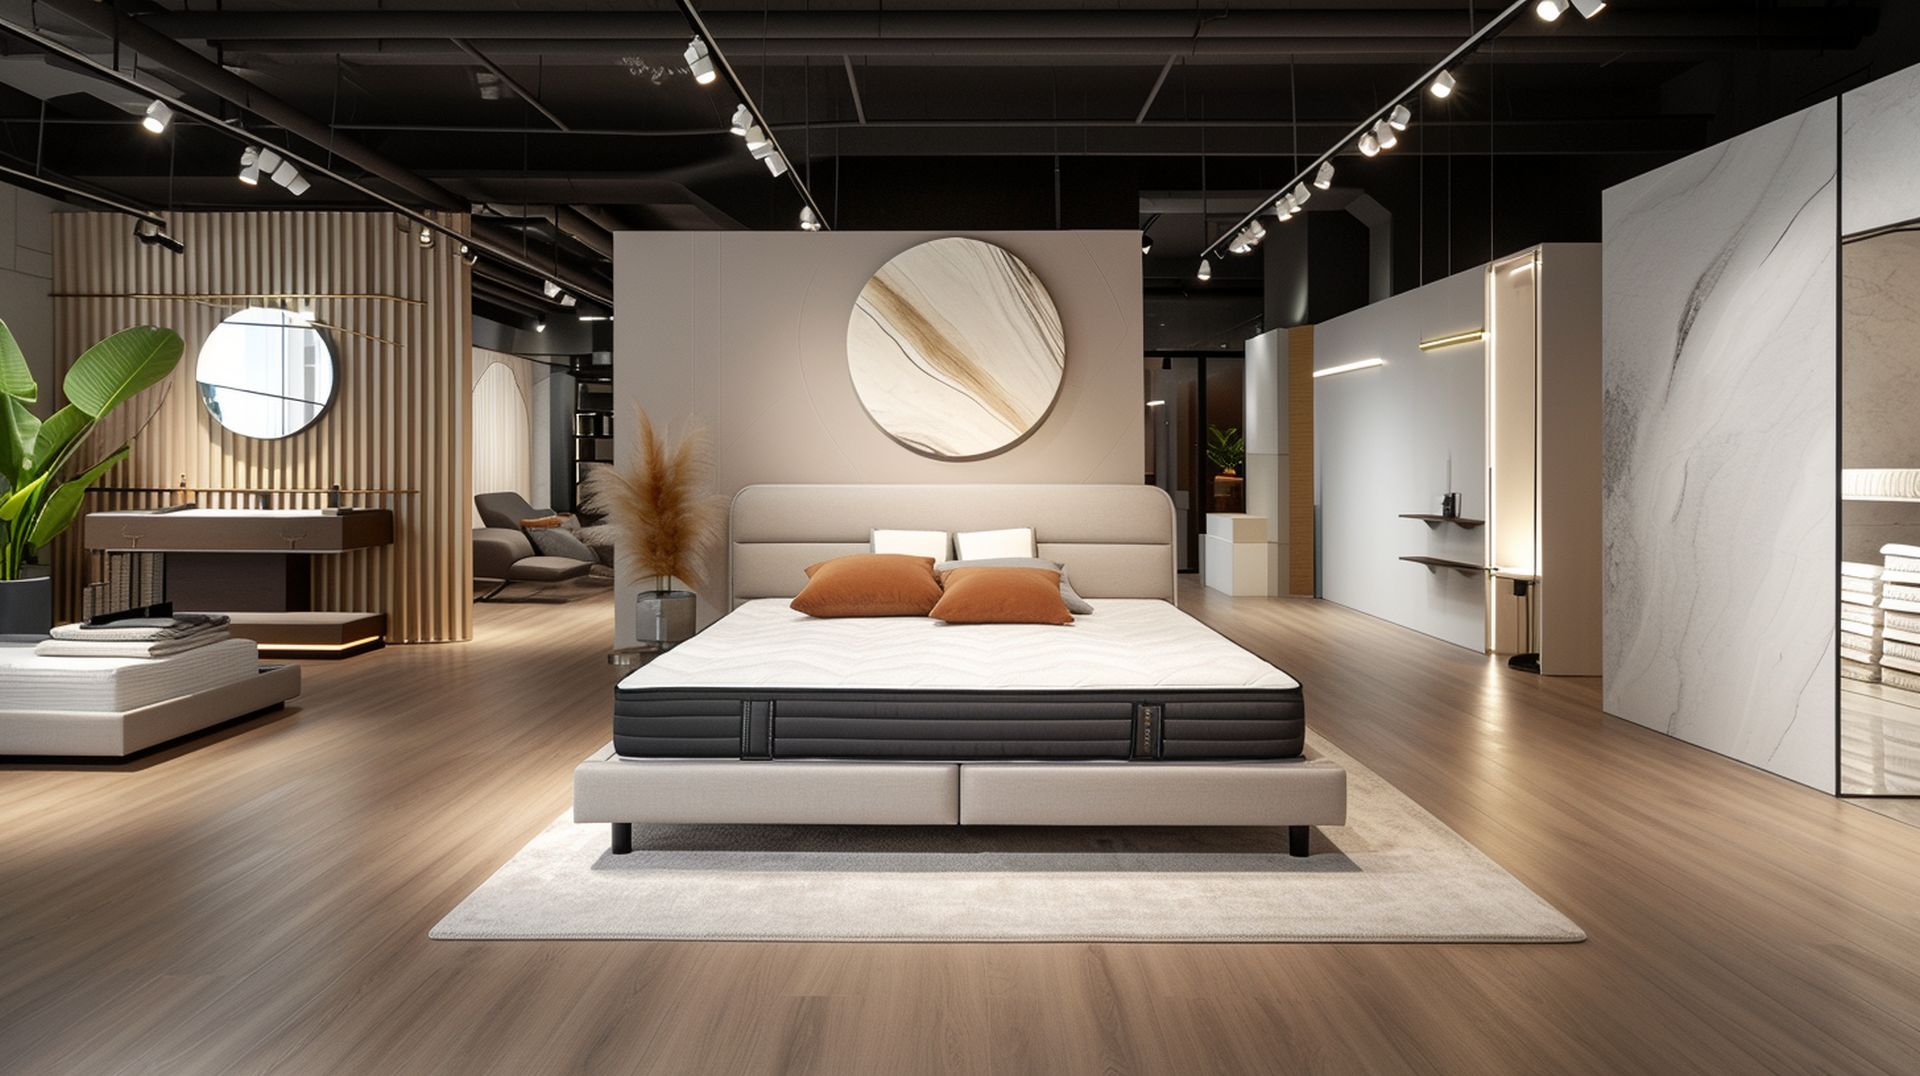 If you're looking for a new bed, mattress stores in Little Rock offer the best customer and delivery service, financing, and warranties in Arkansas